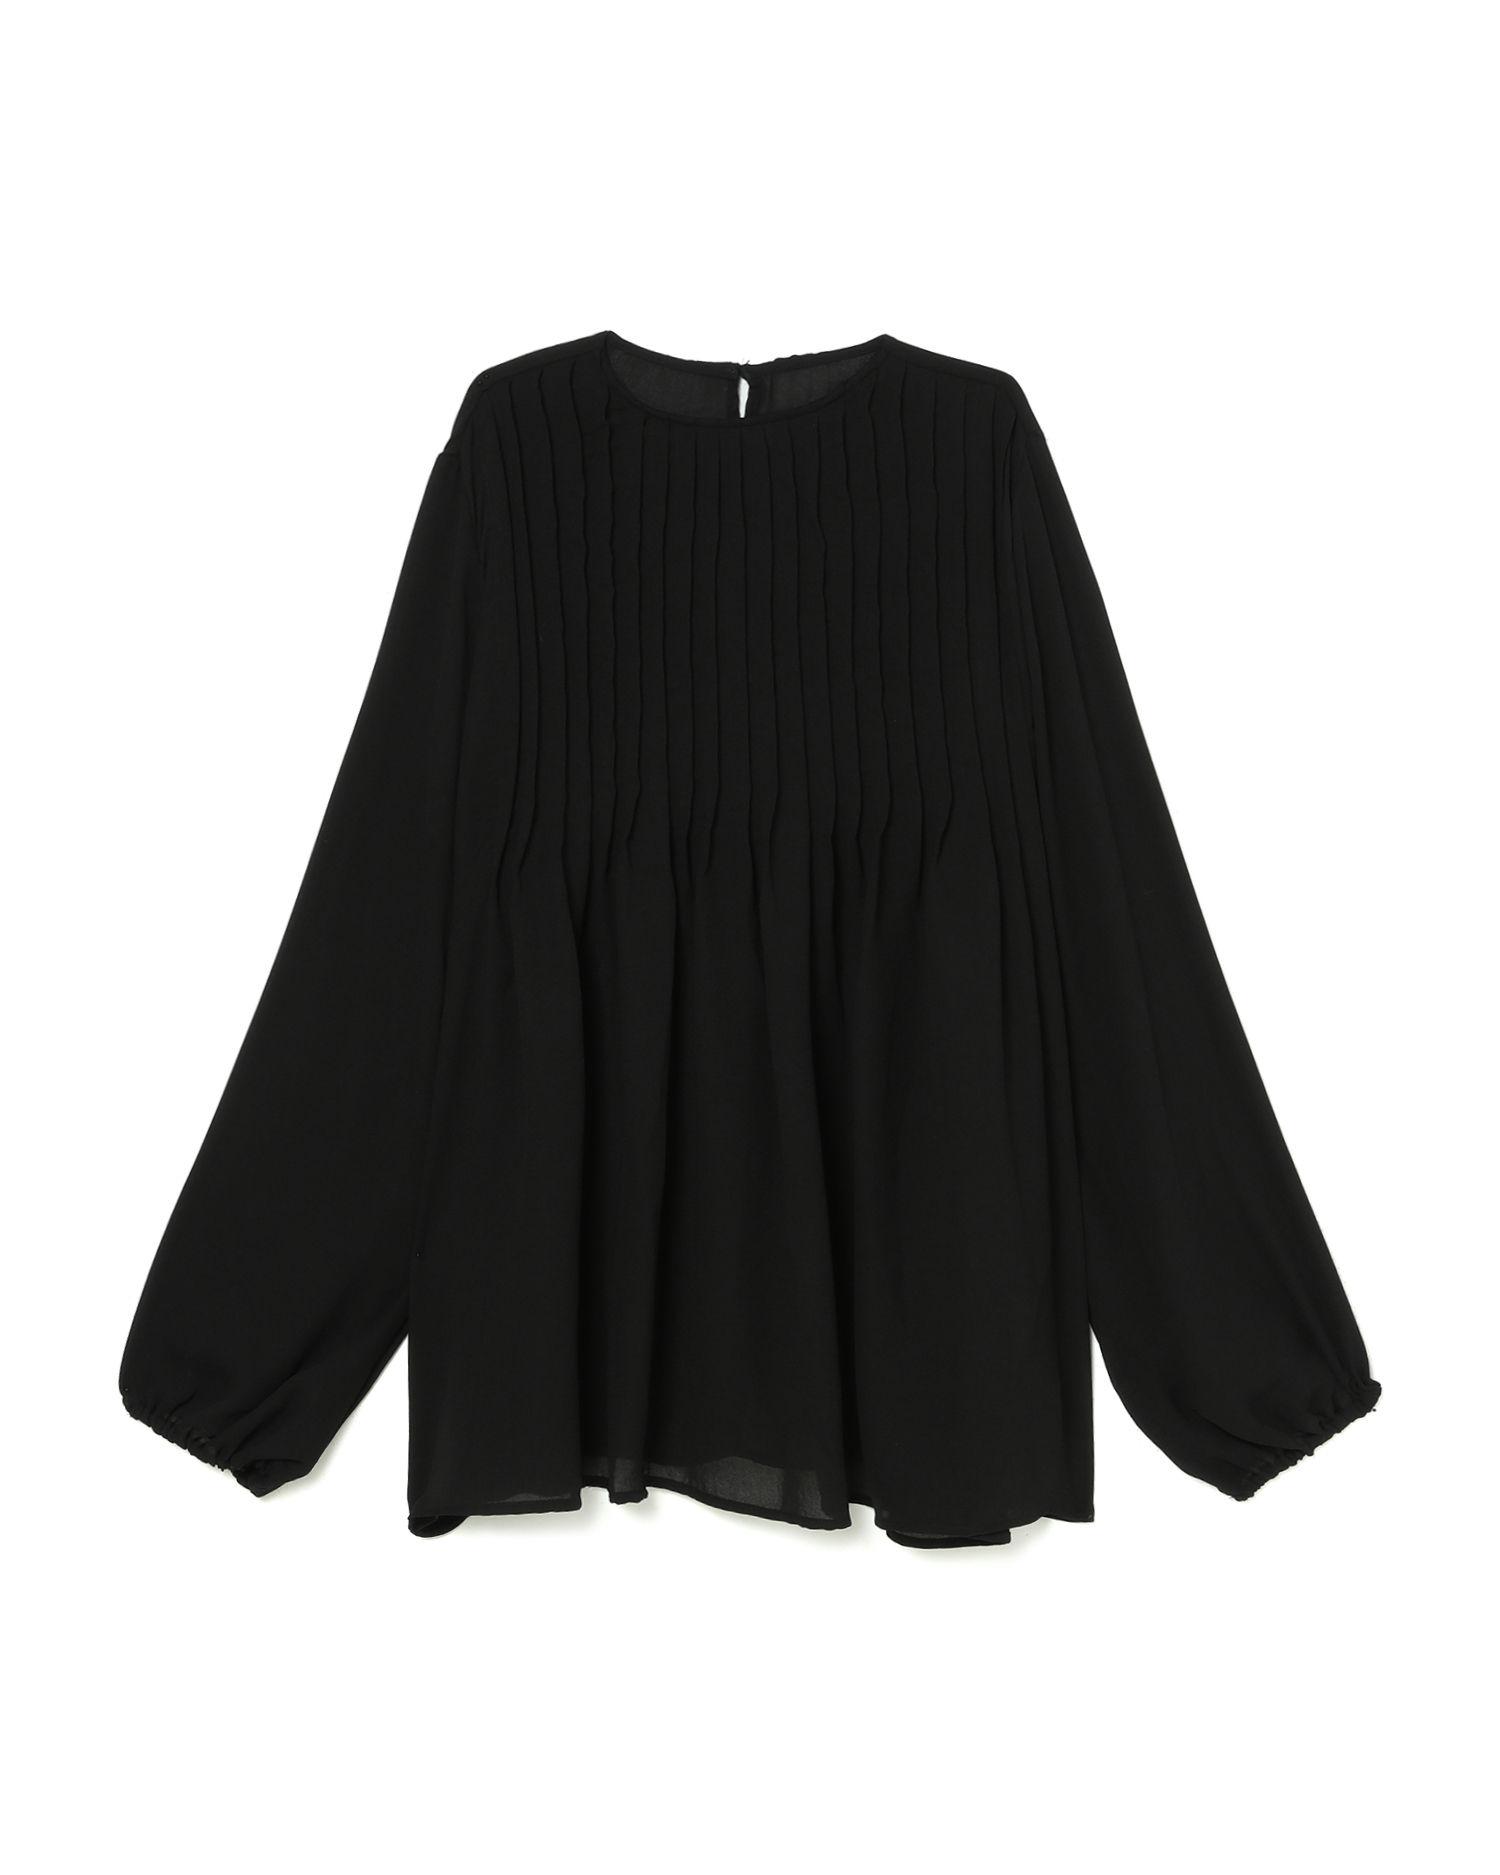 Relaxed ruffled top by AMERICAN HOLIC